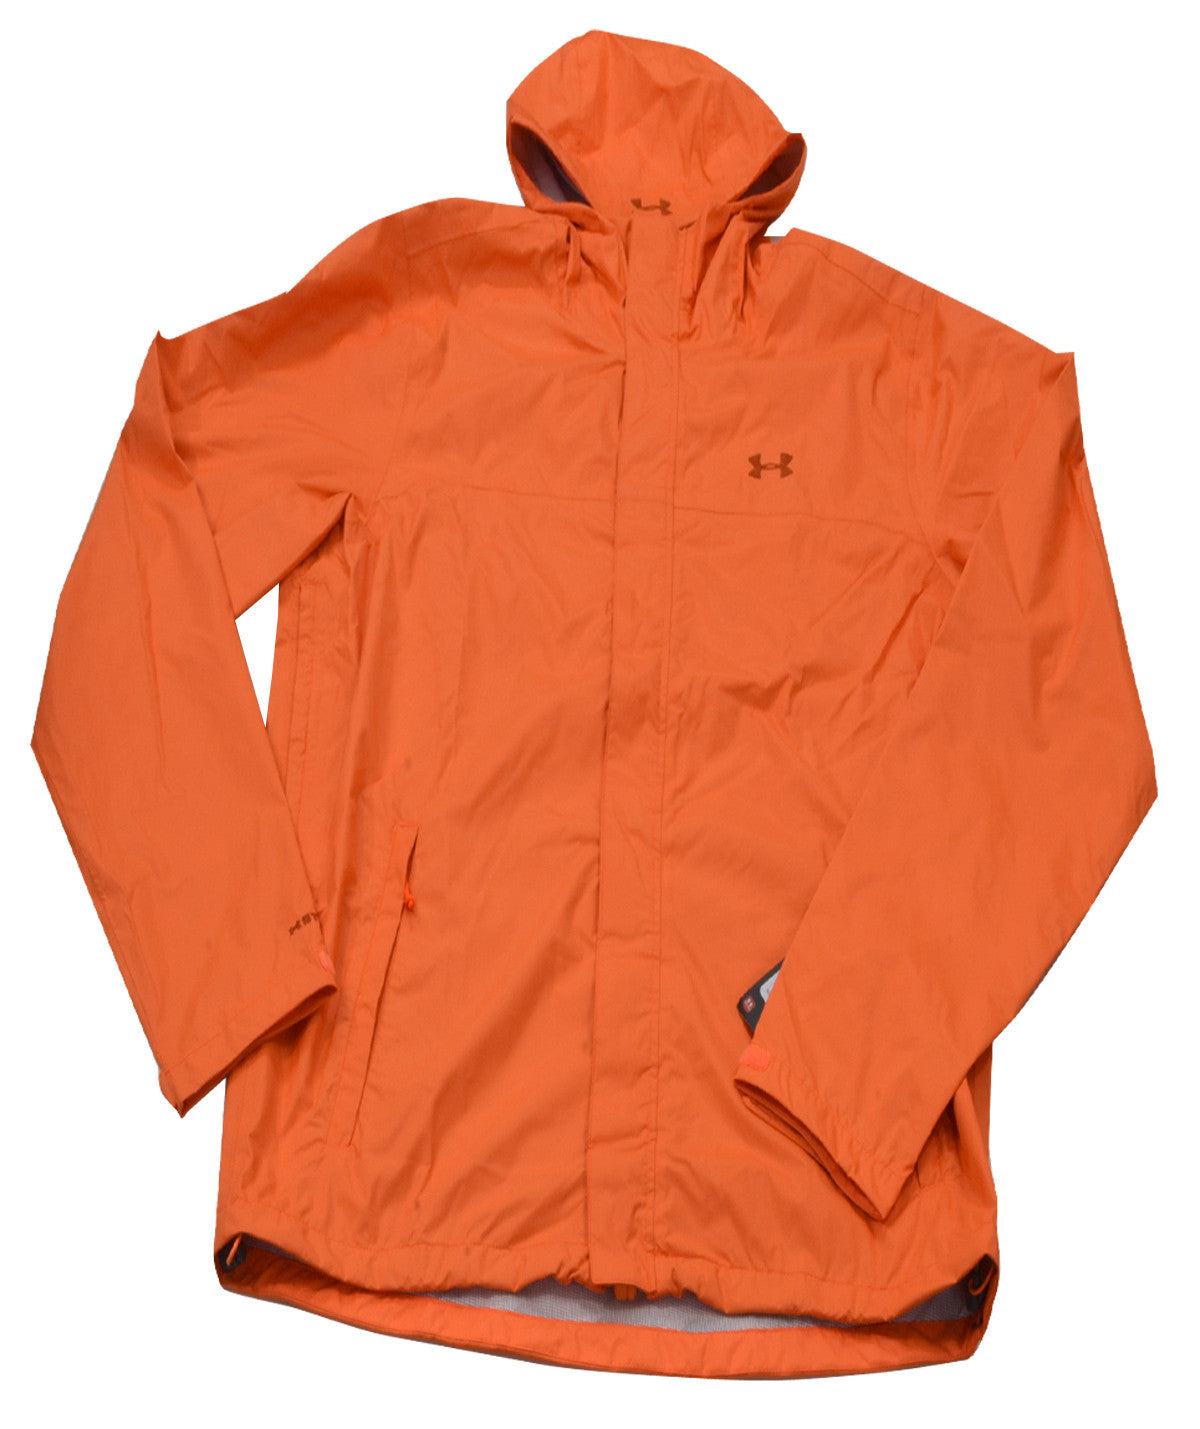 Under Armour Cold Gear Infrared UA Run Jacket Mens Small Orange